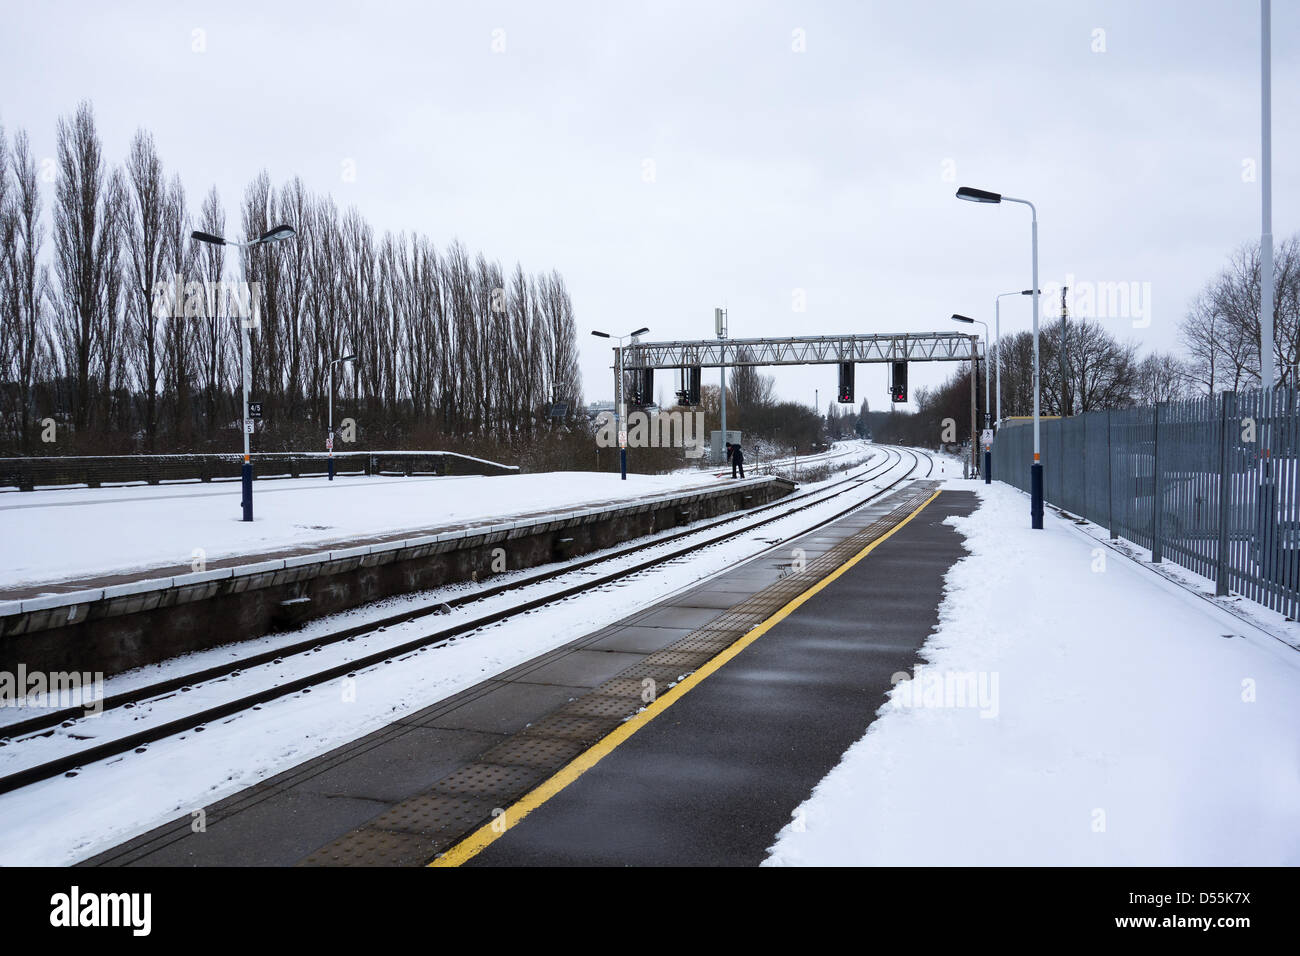 Kettering, Northamptonshire. 24th March, 2013. Kettering railway station was kept open and pasengers could safely walk along the platform despite the snow which engulfed much of the UK. Credit: Miscellaney/Alamy Live News Stock Photo